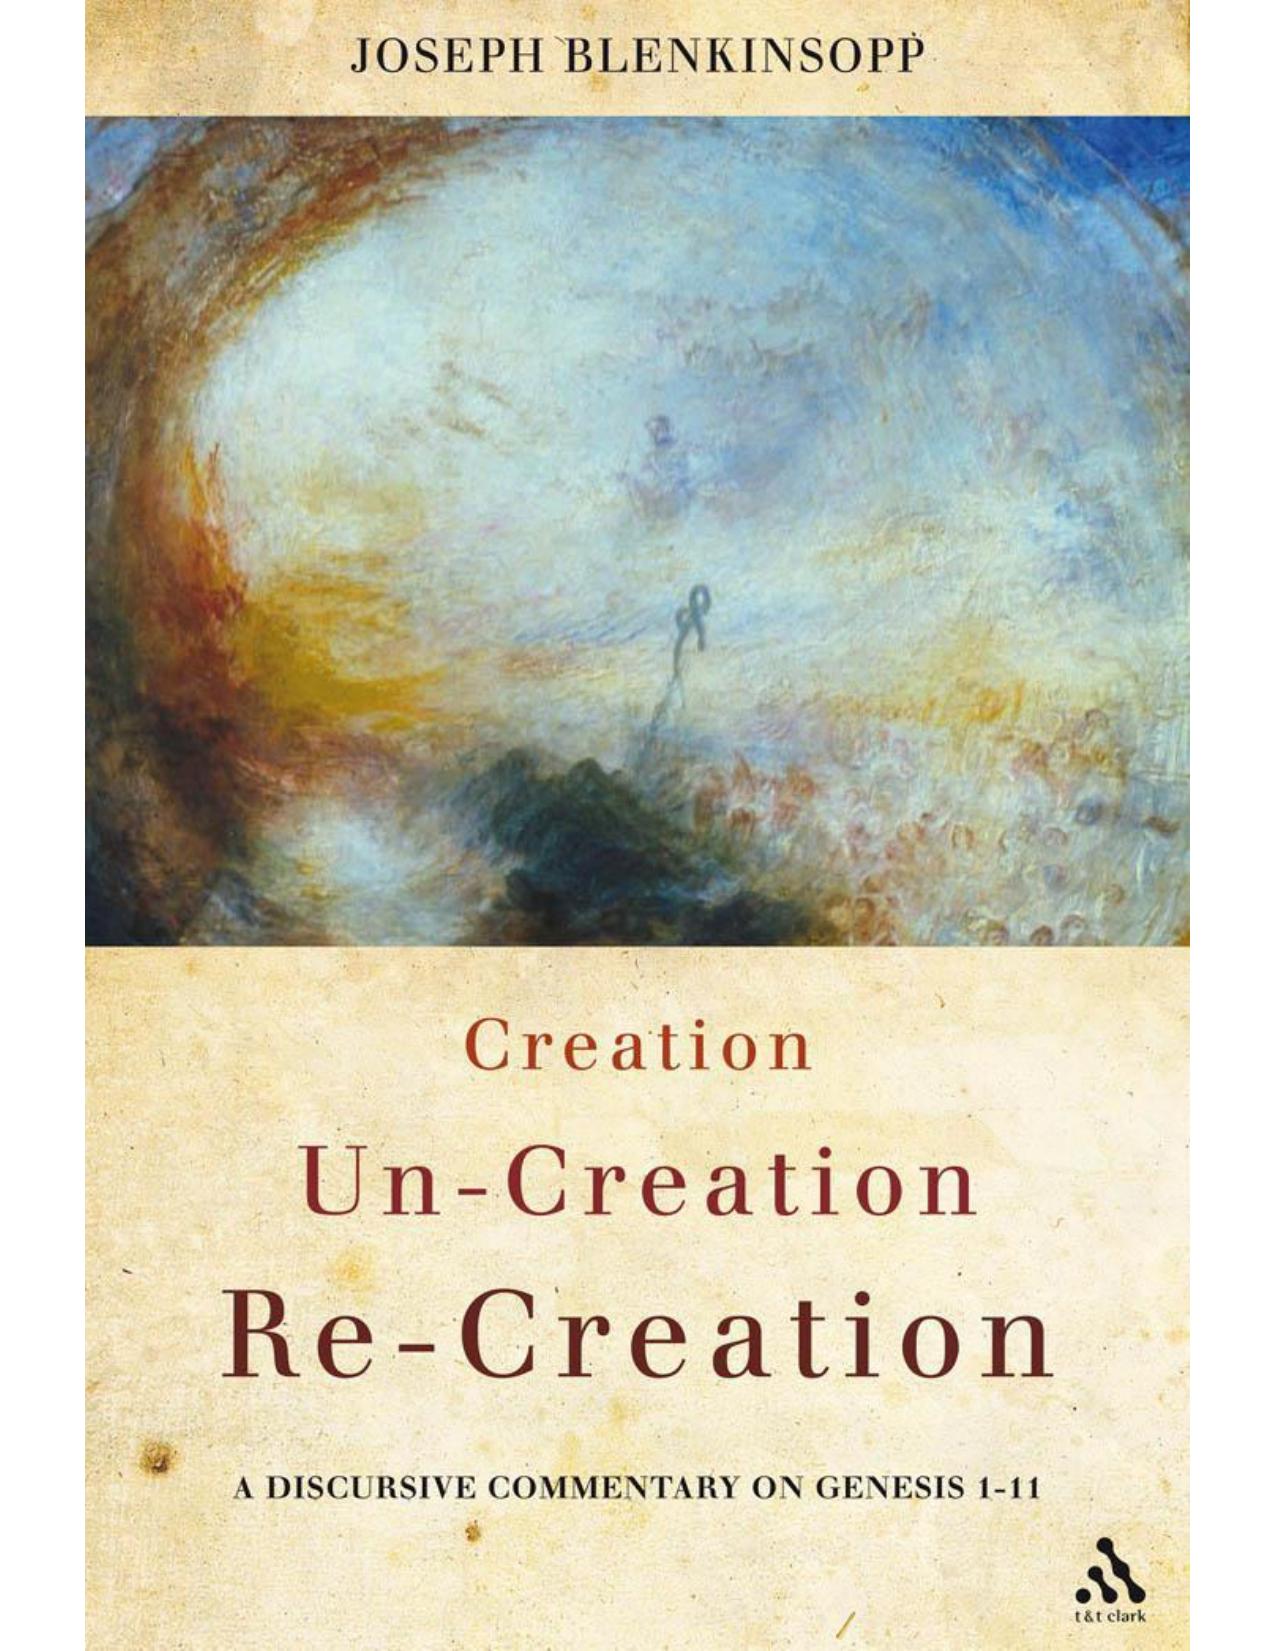 Creation, un-Creation, Re-creation : A Discursive Commentary on Genesis 1-11 by Joseph Blenkinsopp